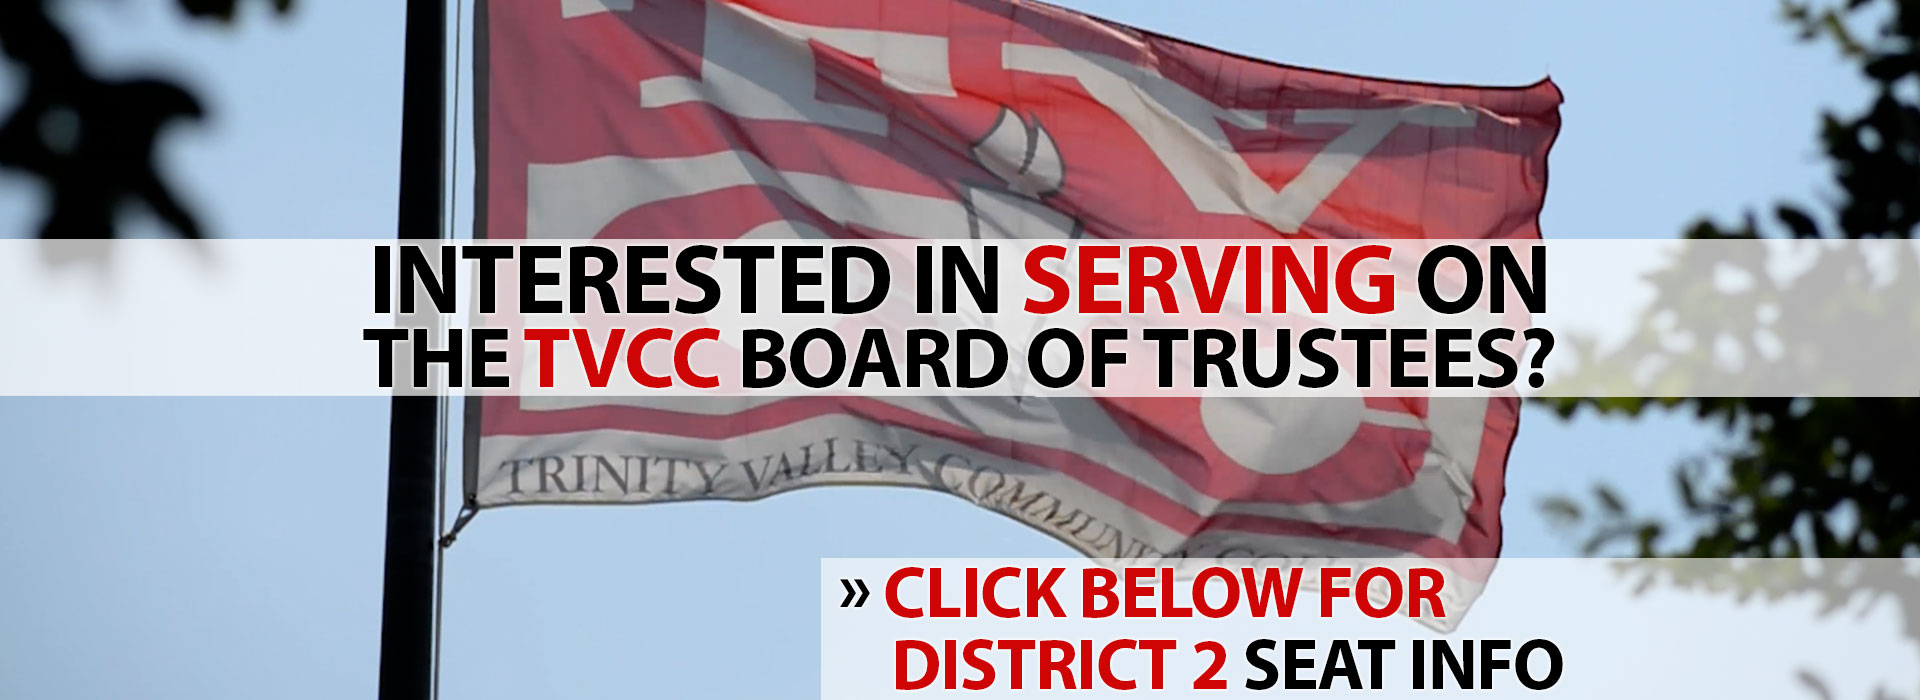 Interested in serving on the TVCC Board of Trustees?  Click below for District 2 Seat Info